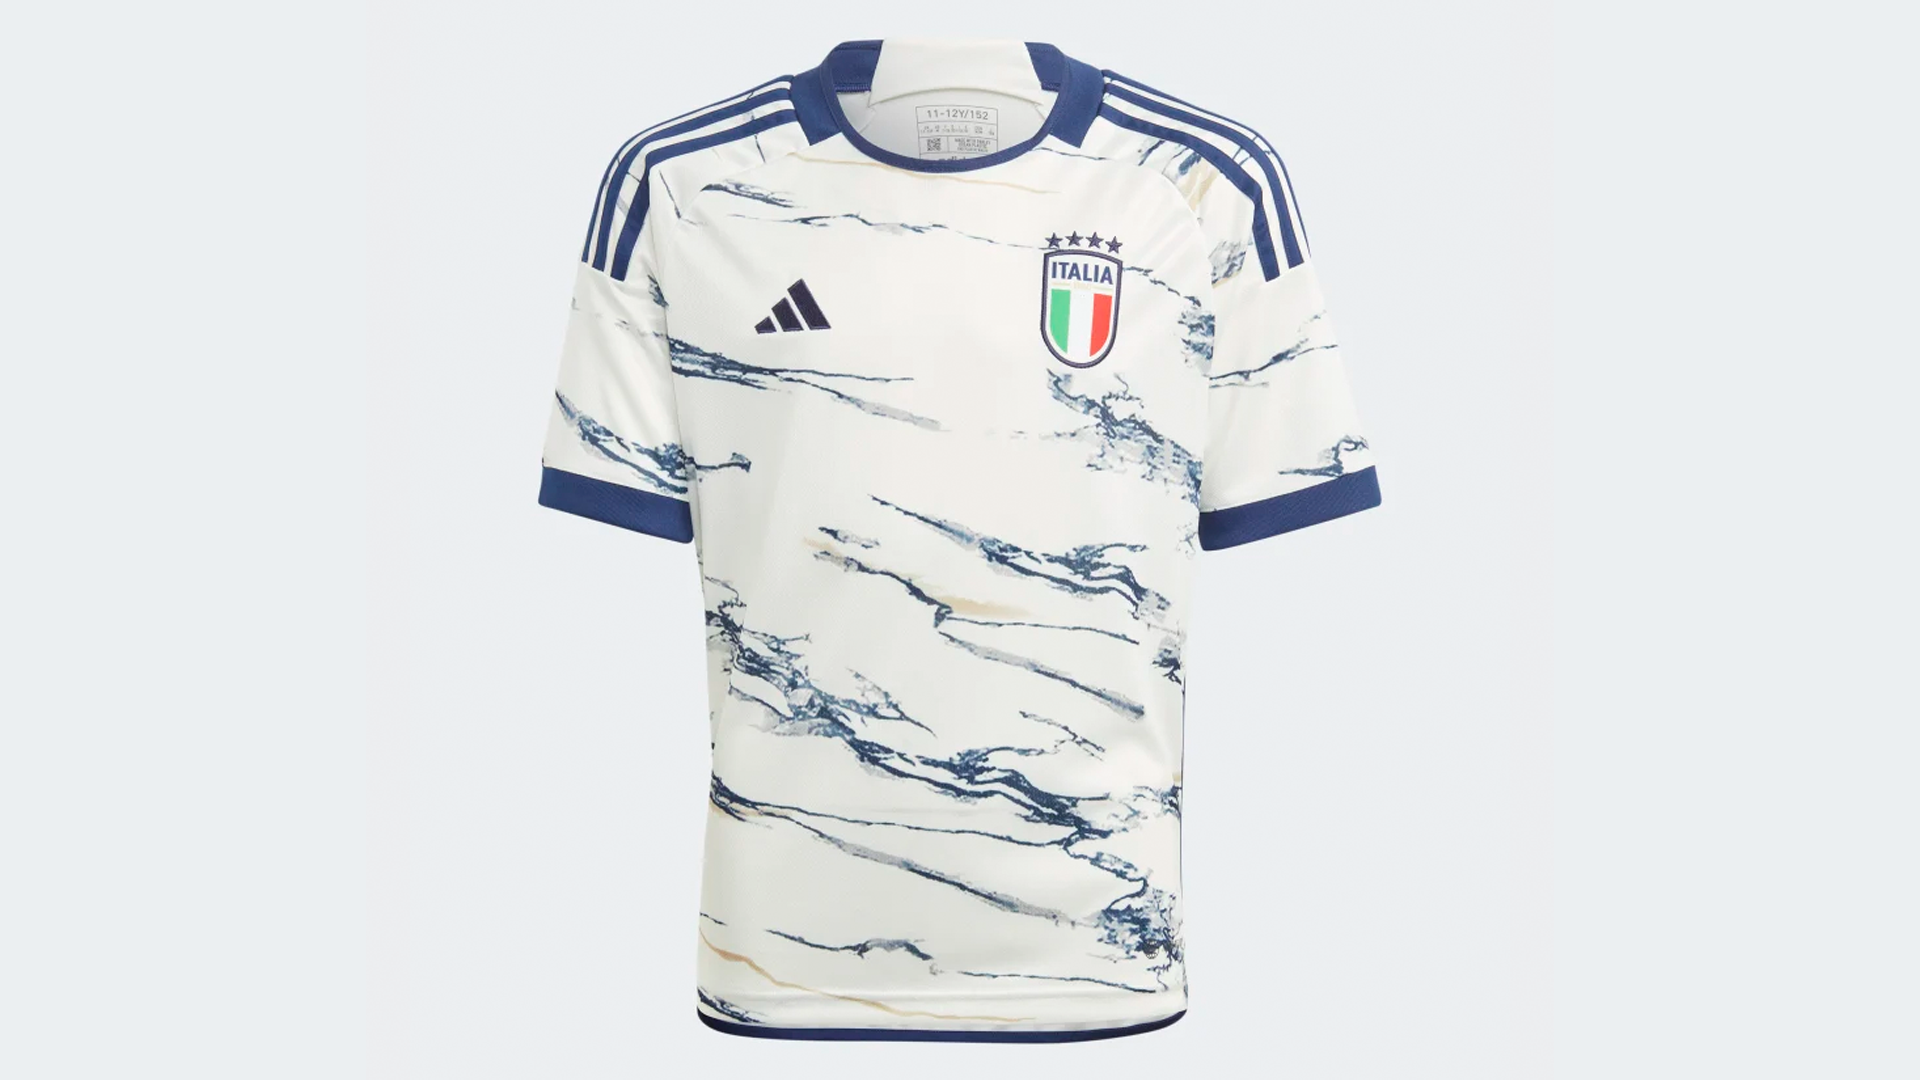 adidas and Italy unveil the allnew Italy 23 kits infused with Italian